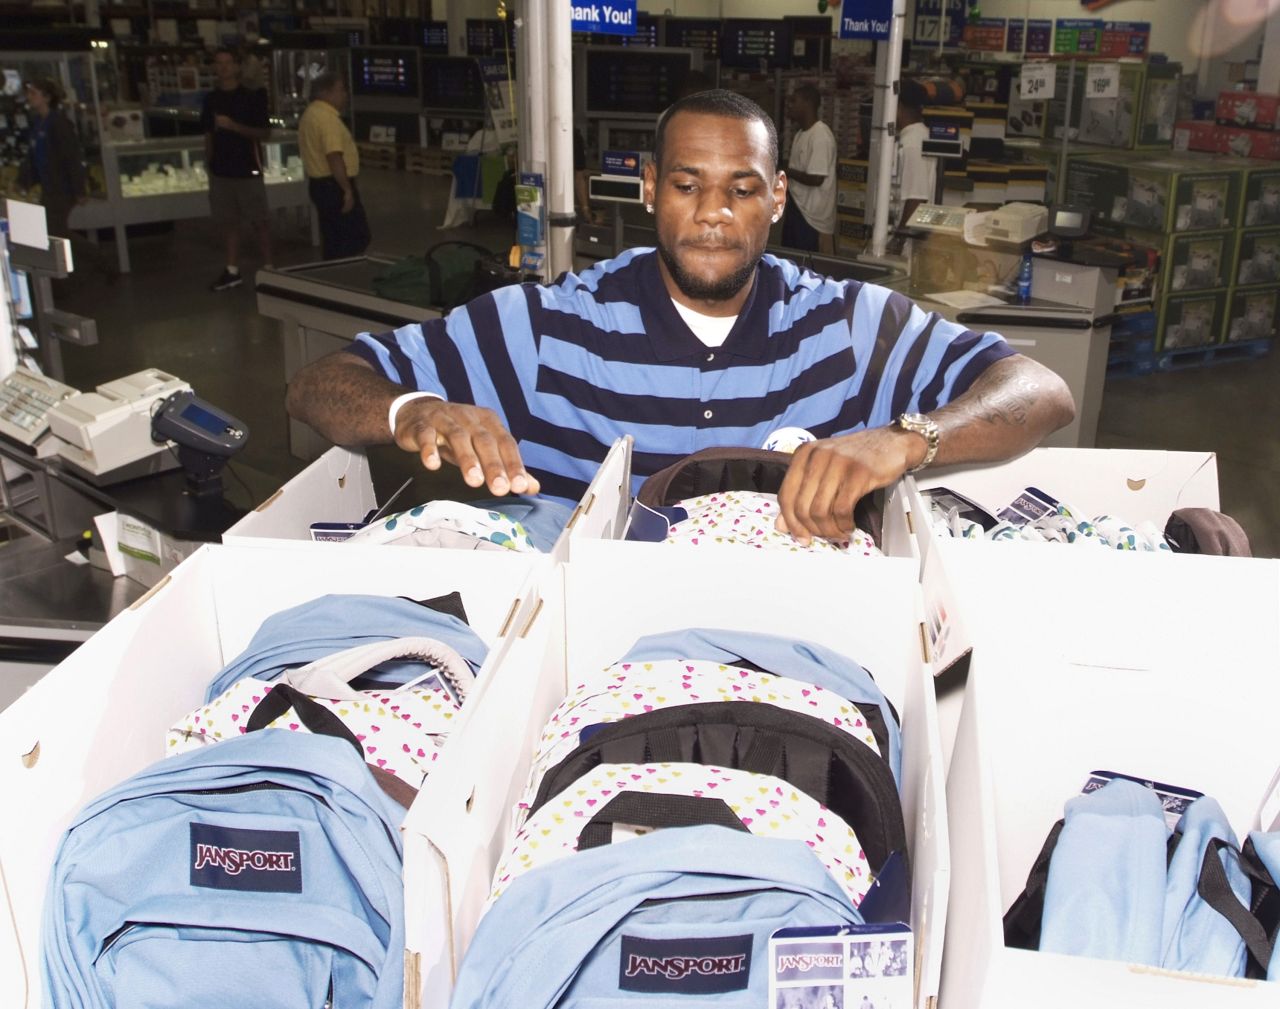 James looks over backpacks at Sam's Club in Cuyahoga Falls, Ohio, in August 2007. James runs a nonprofit organization called the LeBron James Family Foundation, which helps needy children in his hometown area.